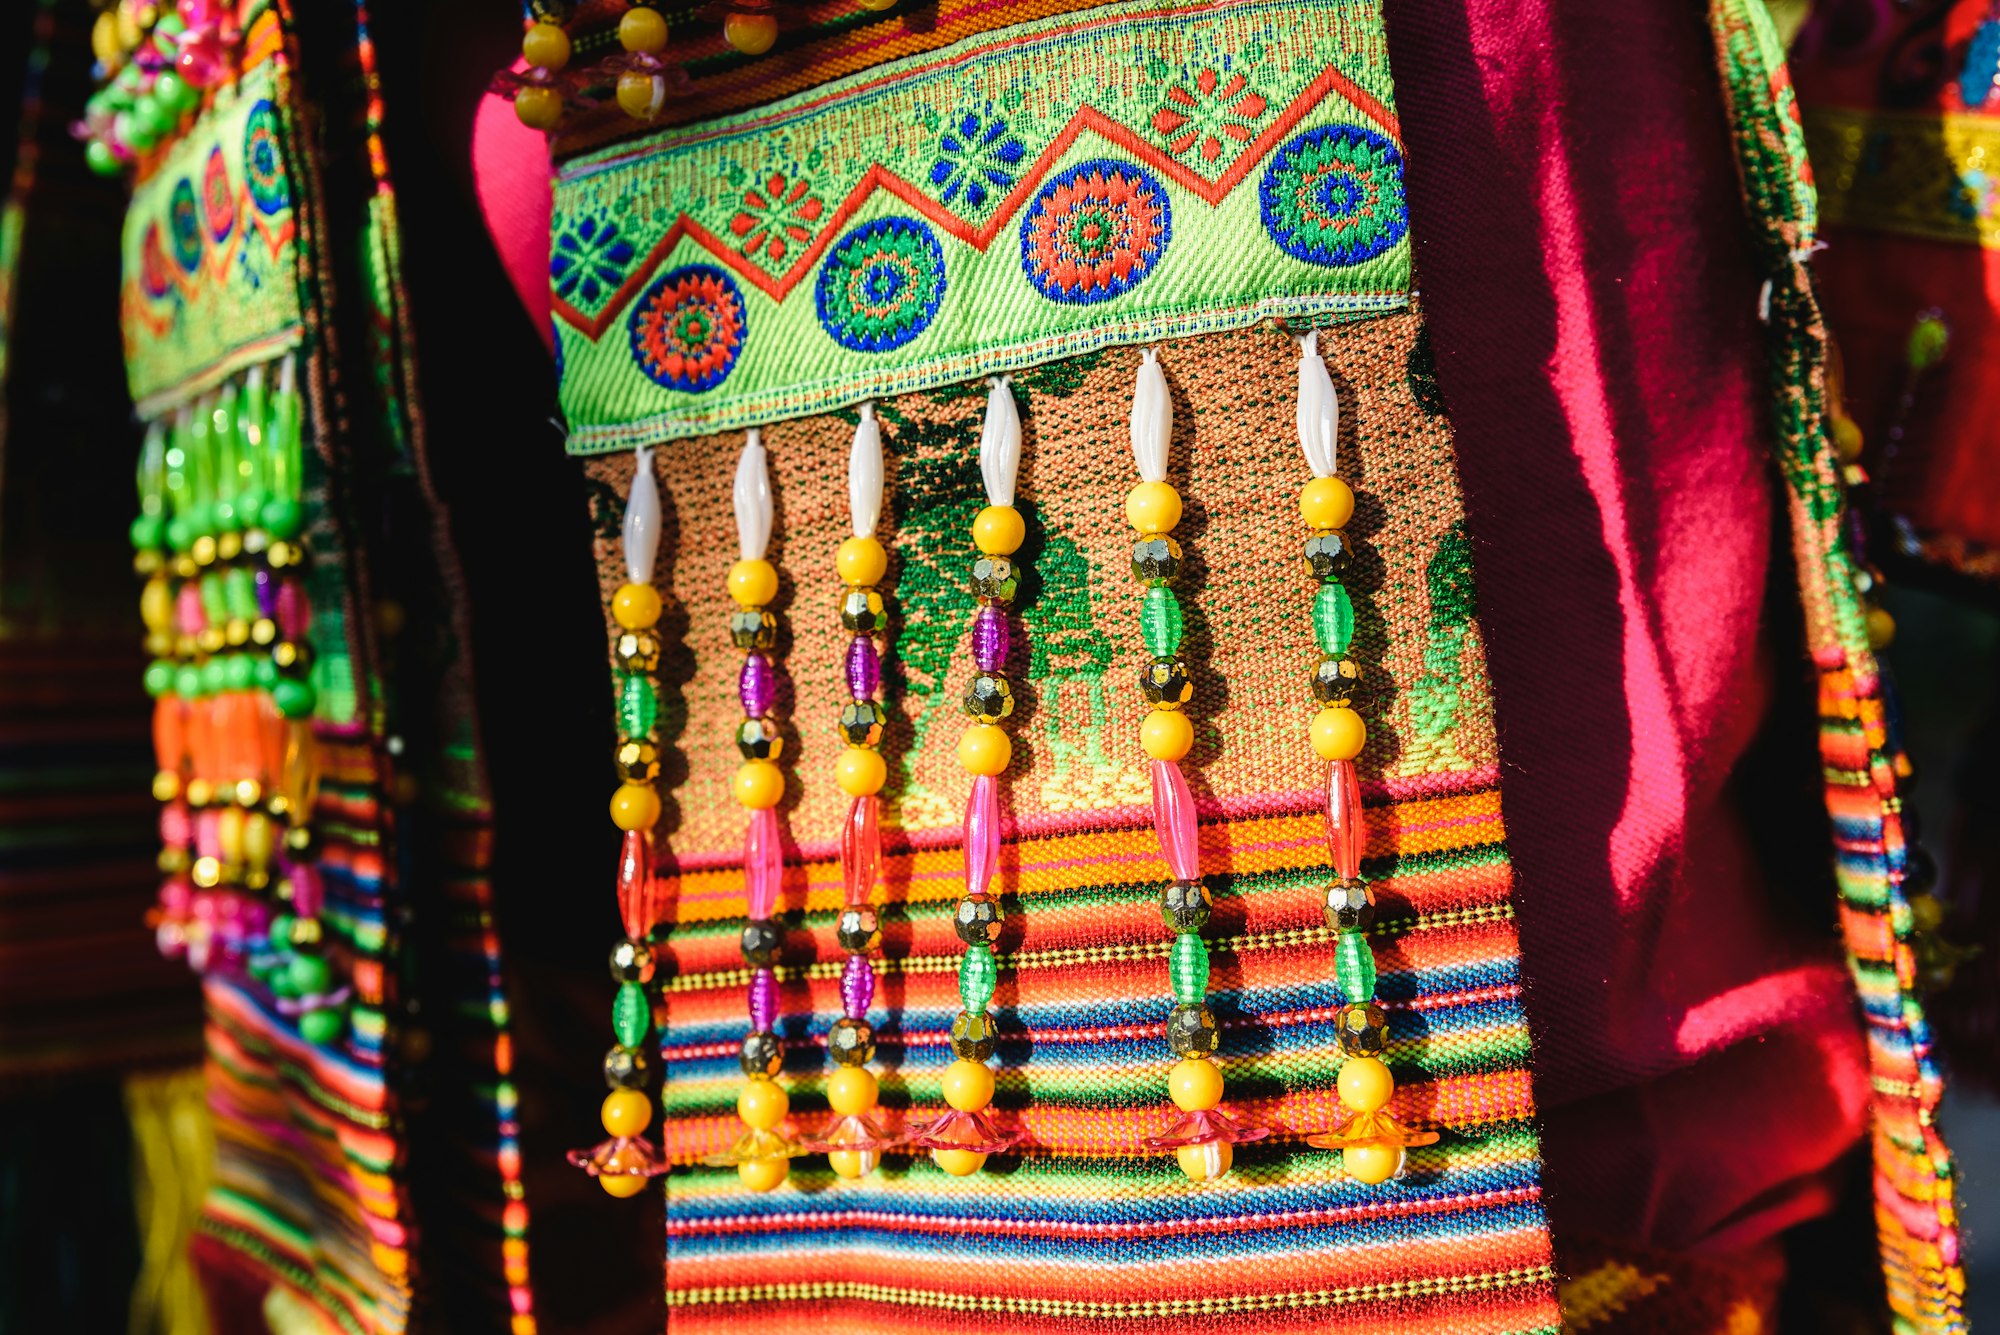 Detail of the colorful embroidery of a typical costume from the Andean folklore of Bolivia